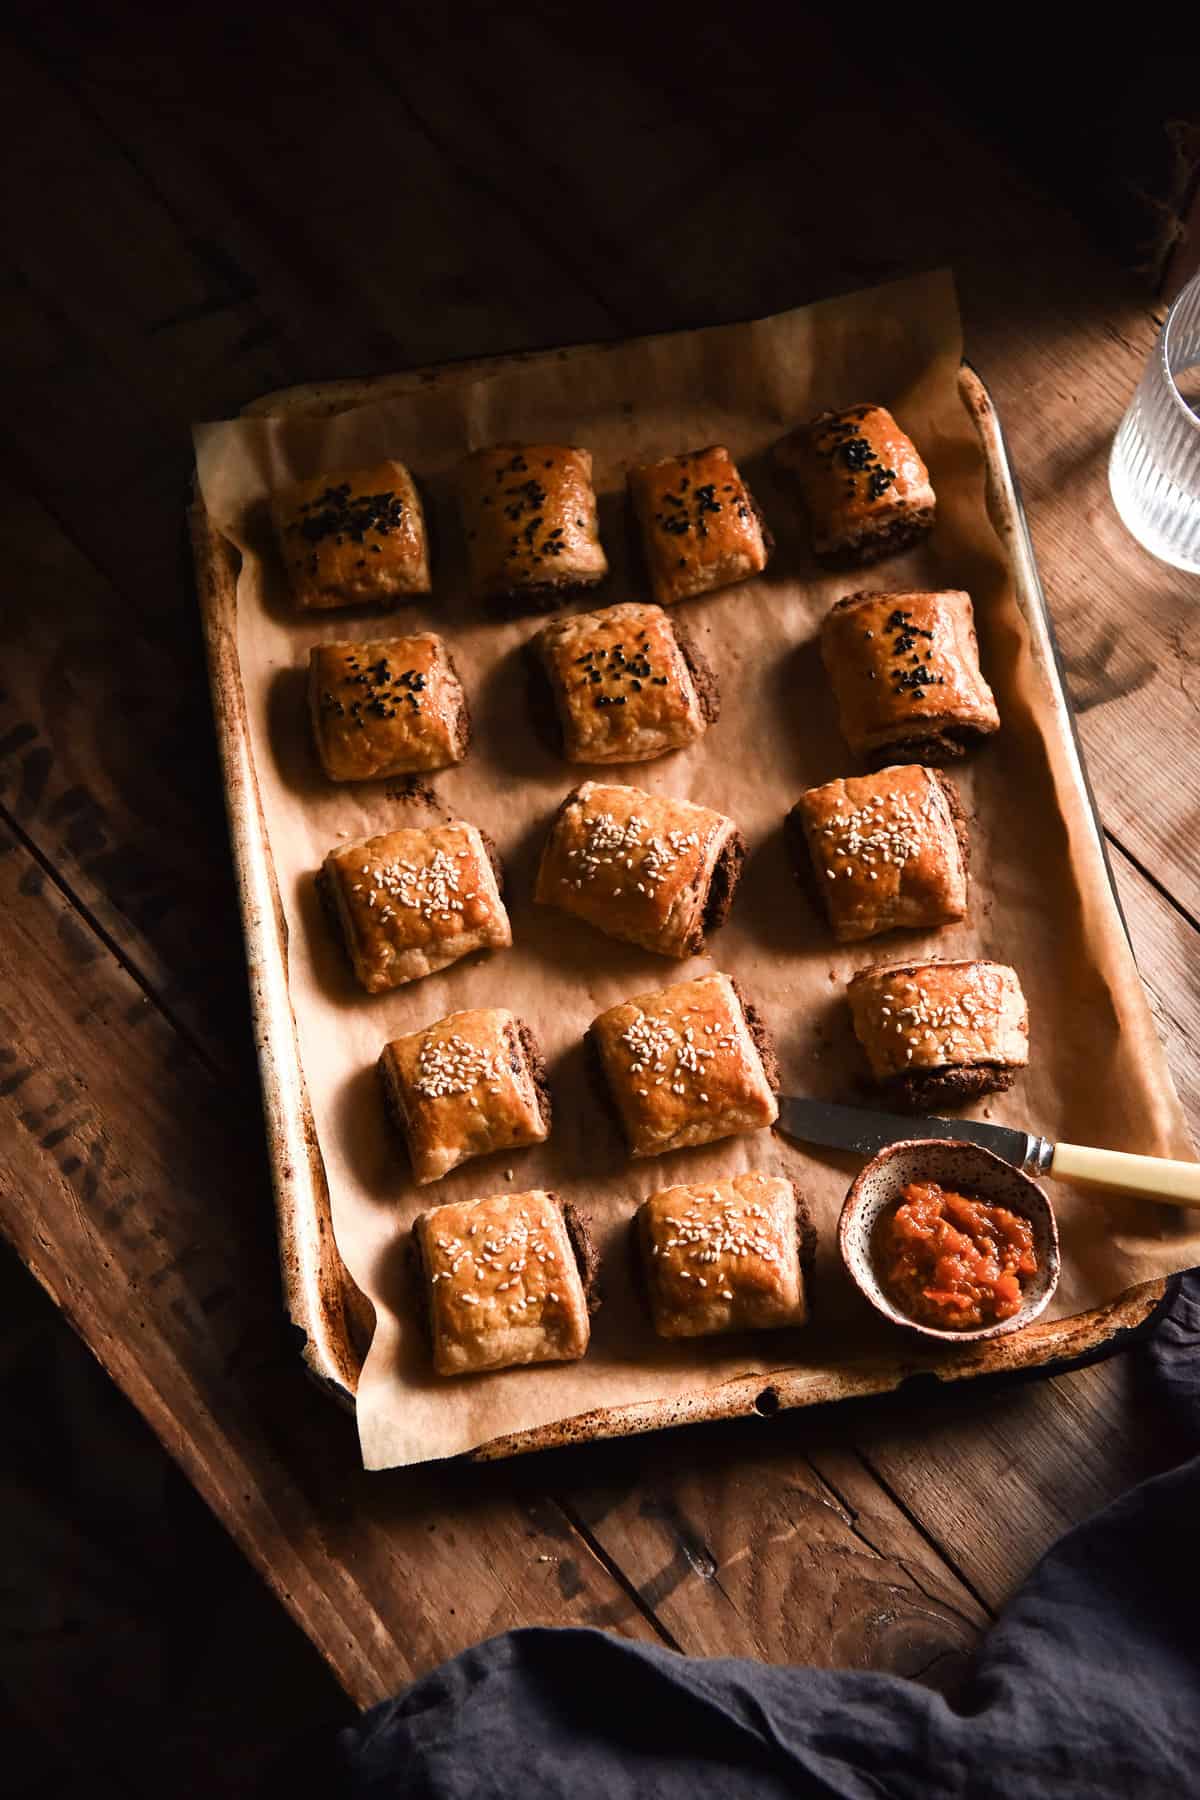 A moody aerial image of vegetarian sausage rolls on a baking tray atop a dark and moody wooden table.